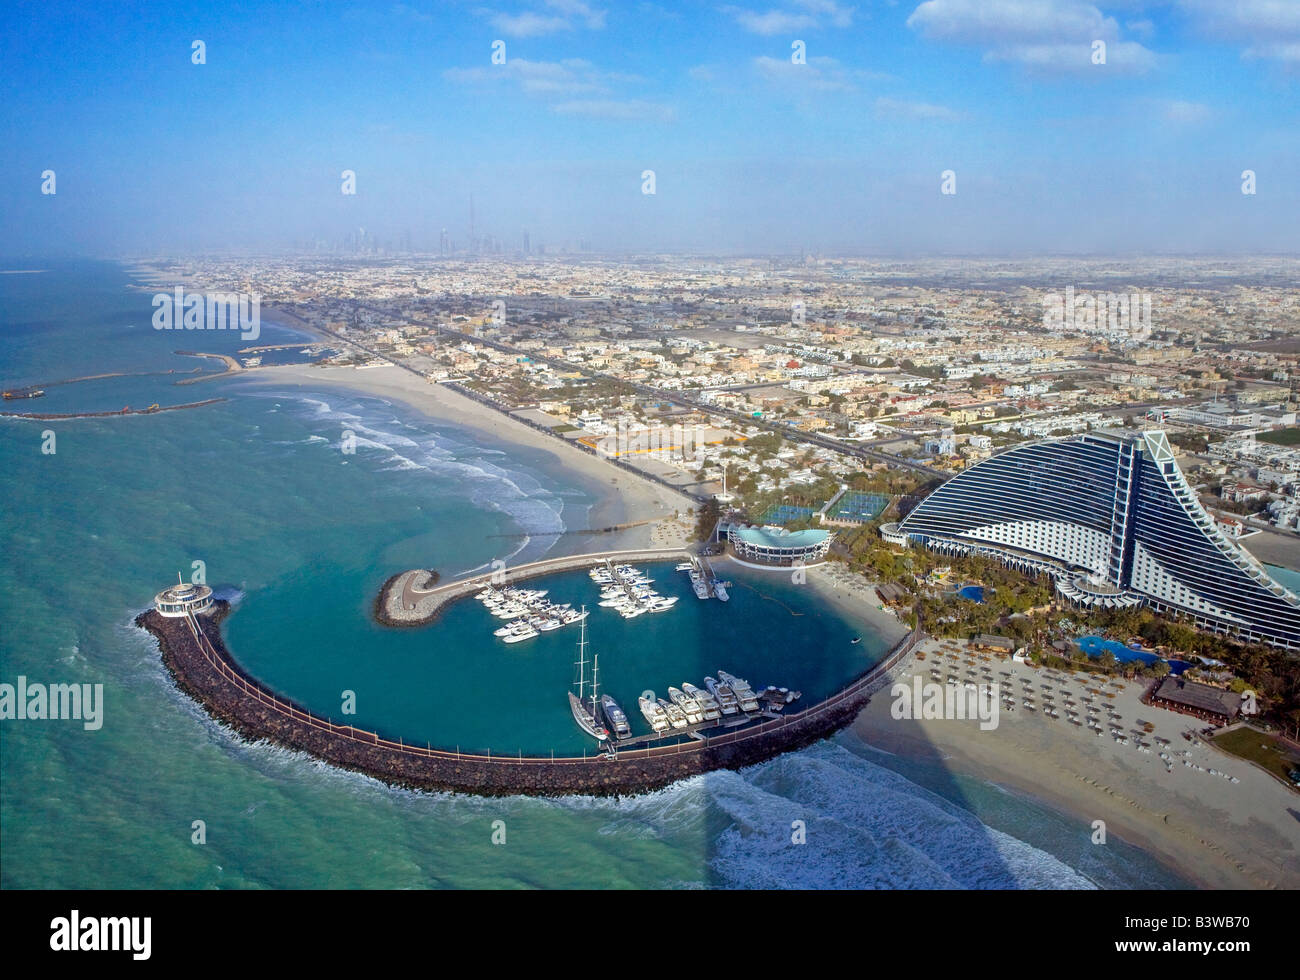 View from Burj Al Arab Hotel towards Jumeirah Beach Hotel and Sheikh Zayed Road in the distance. Dubai, UAE. Stock Photo